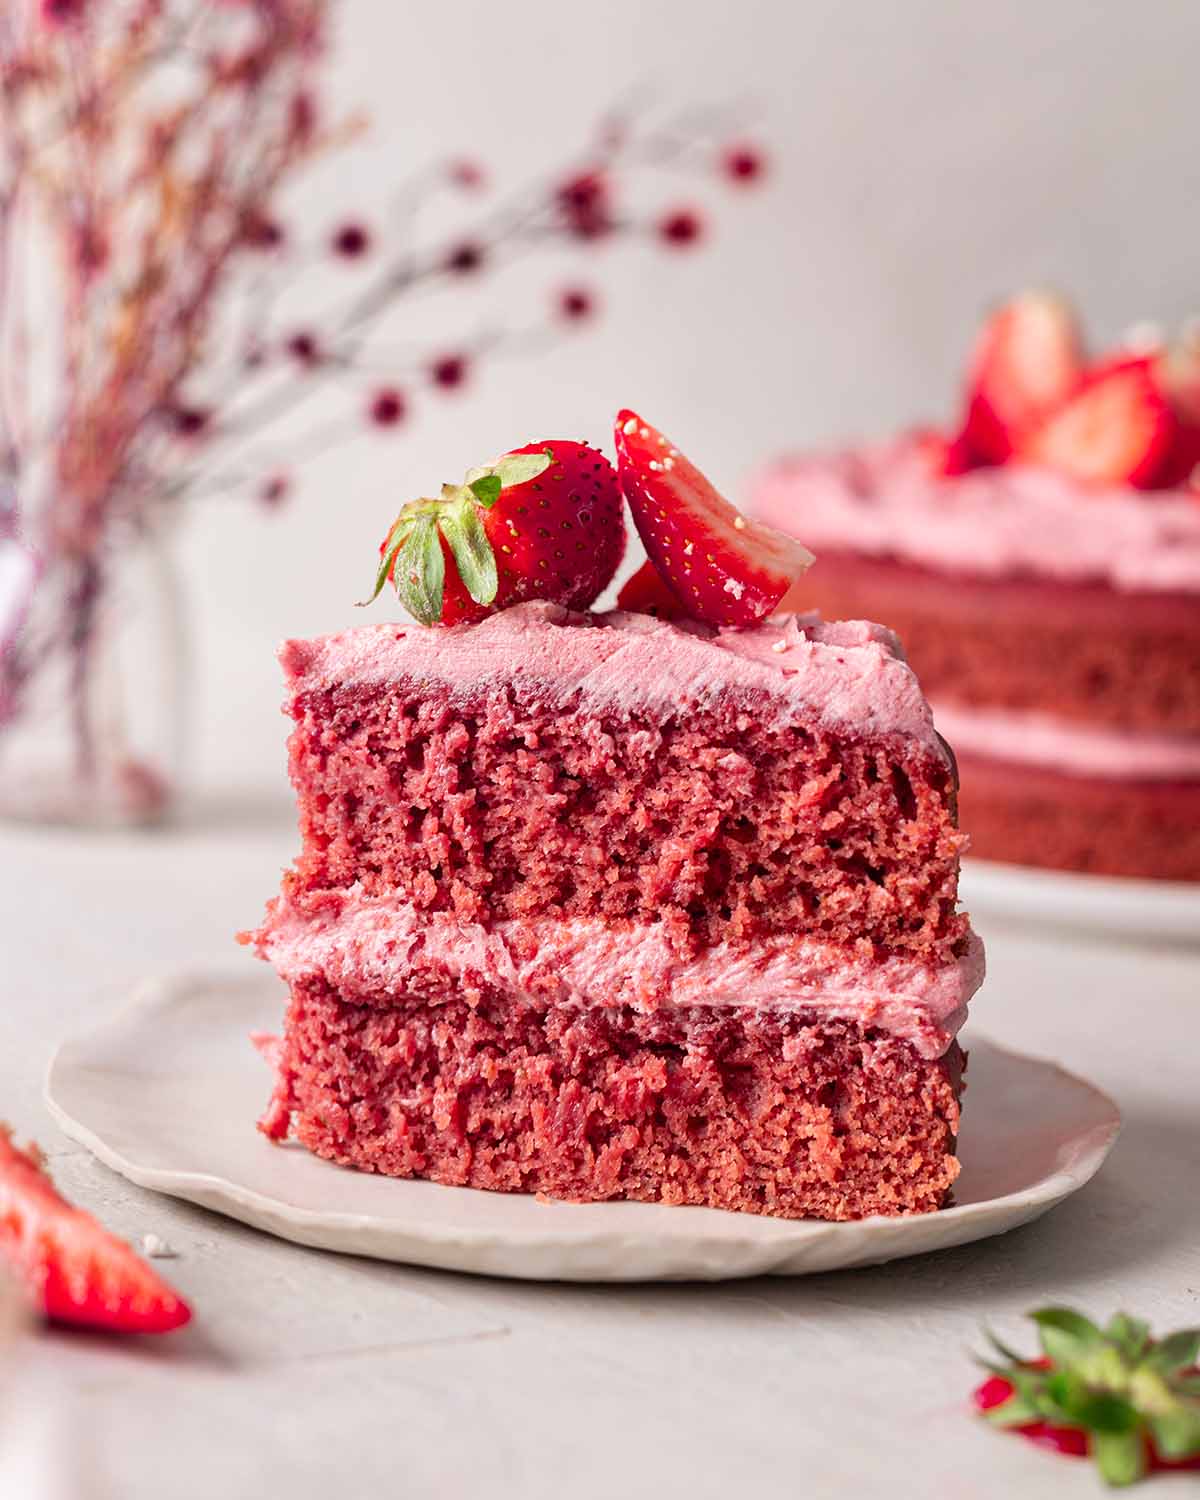 Individual slice of strawberry cake showing very fluffy and pink layers.